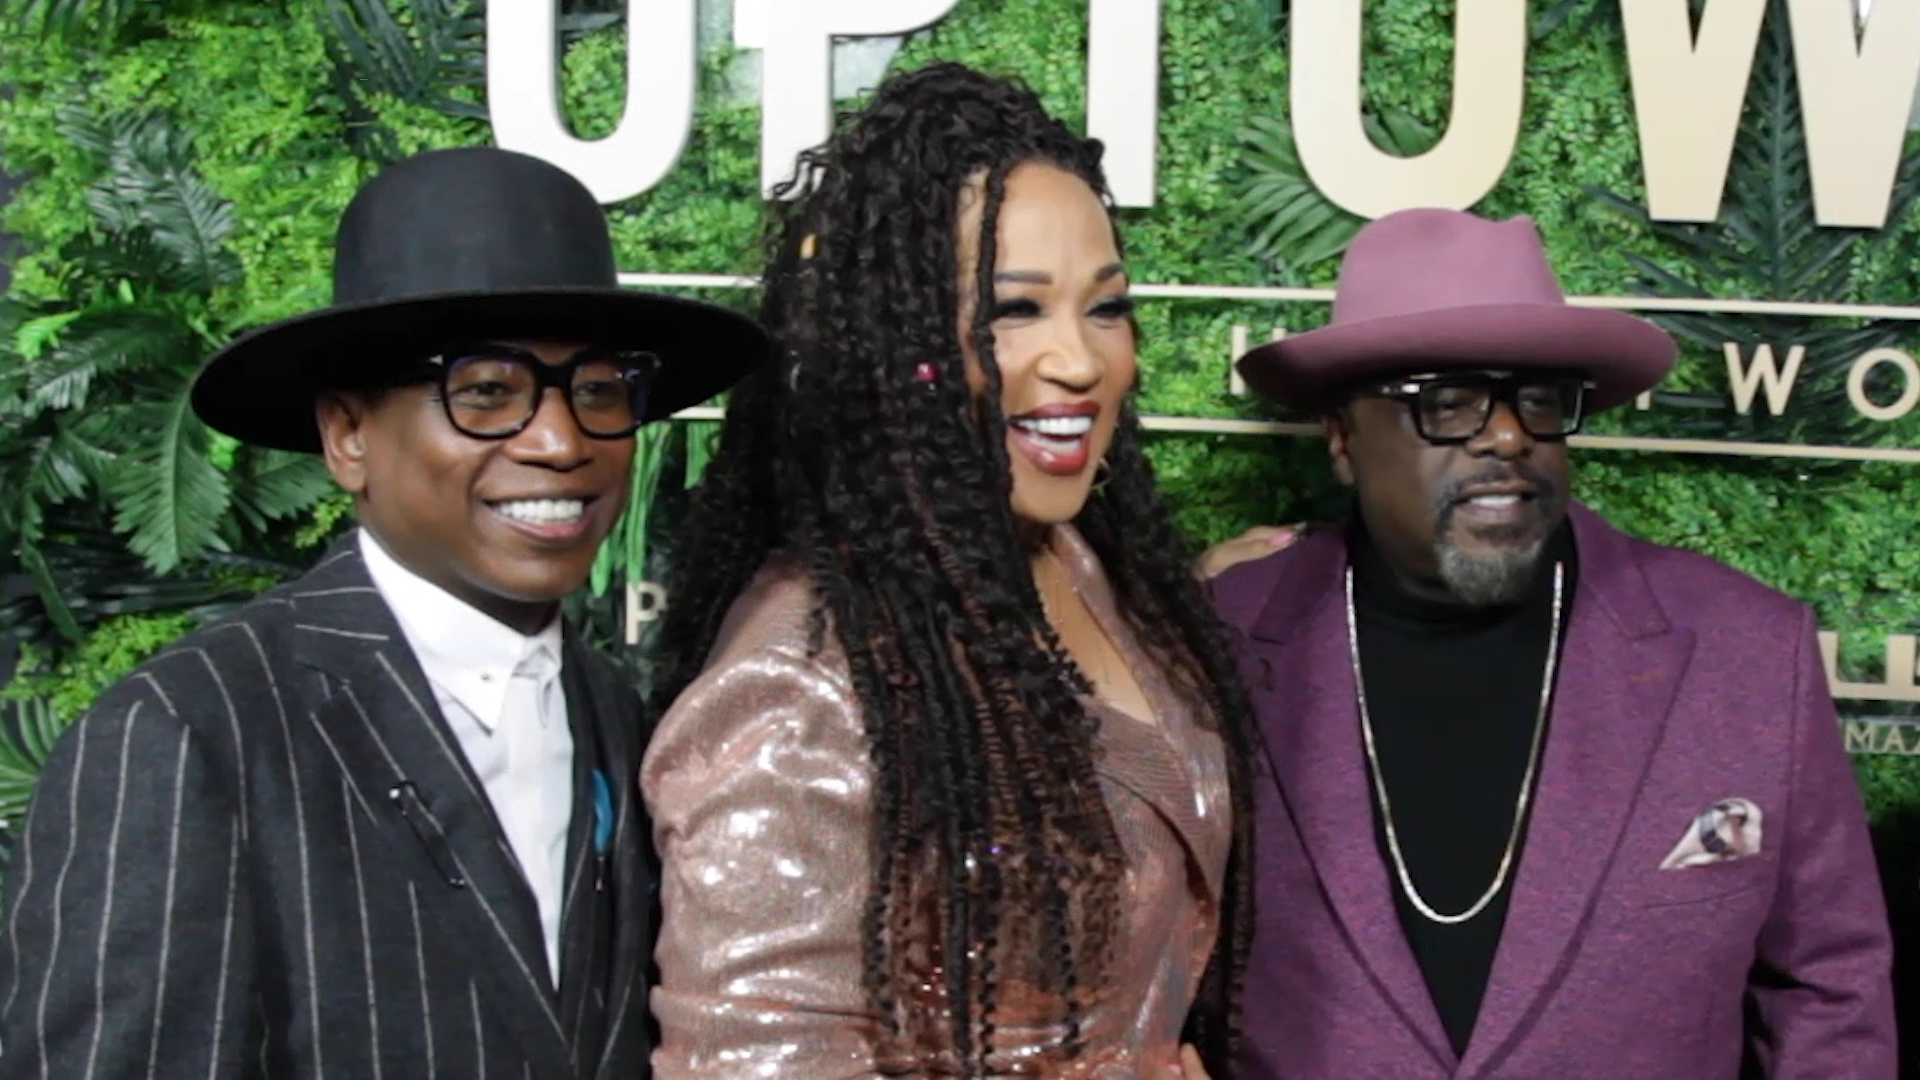 Uptown_Honors_Celebrates_Comedy Icons_Cedric_The_Entertainer, Kym_Whitley